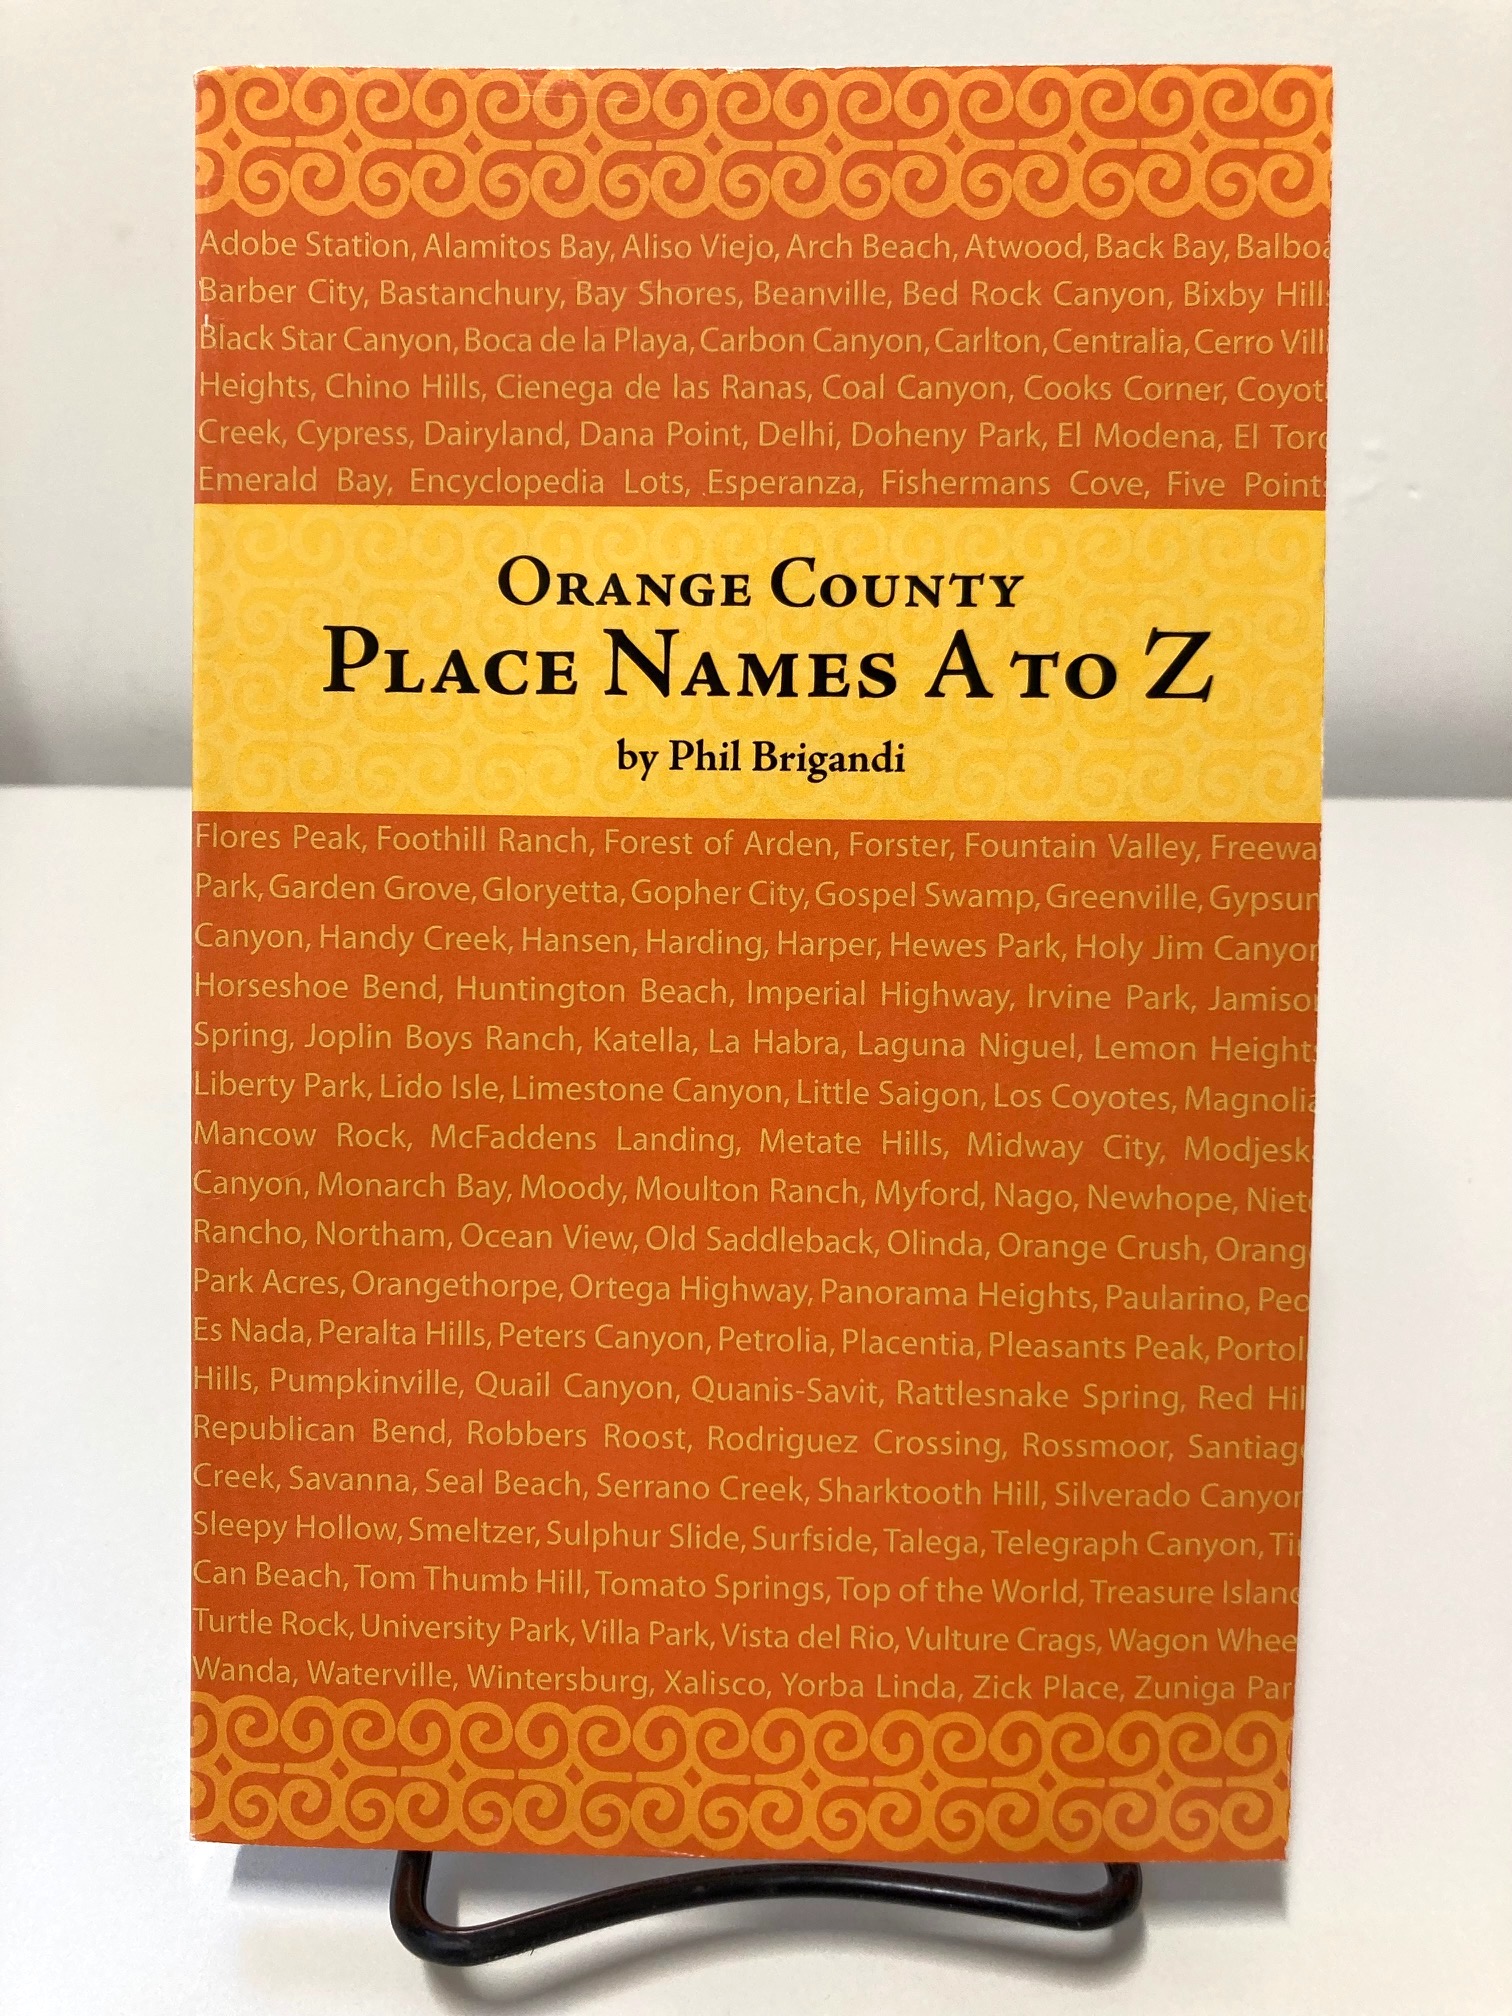 Orange County Place Names book cover